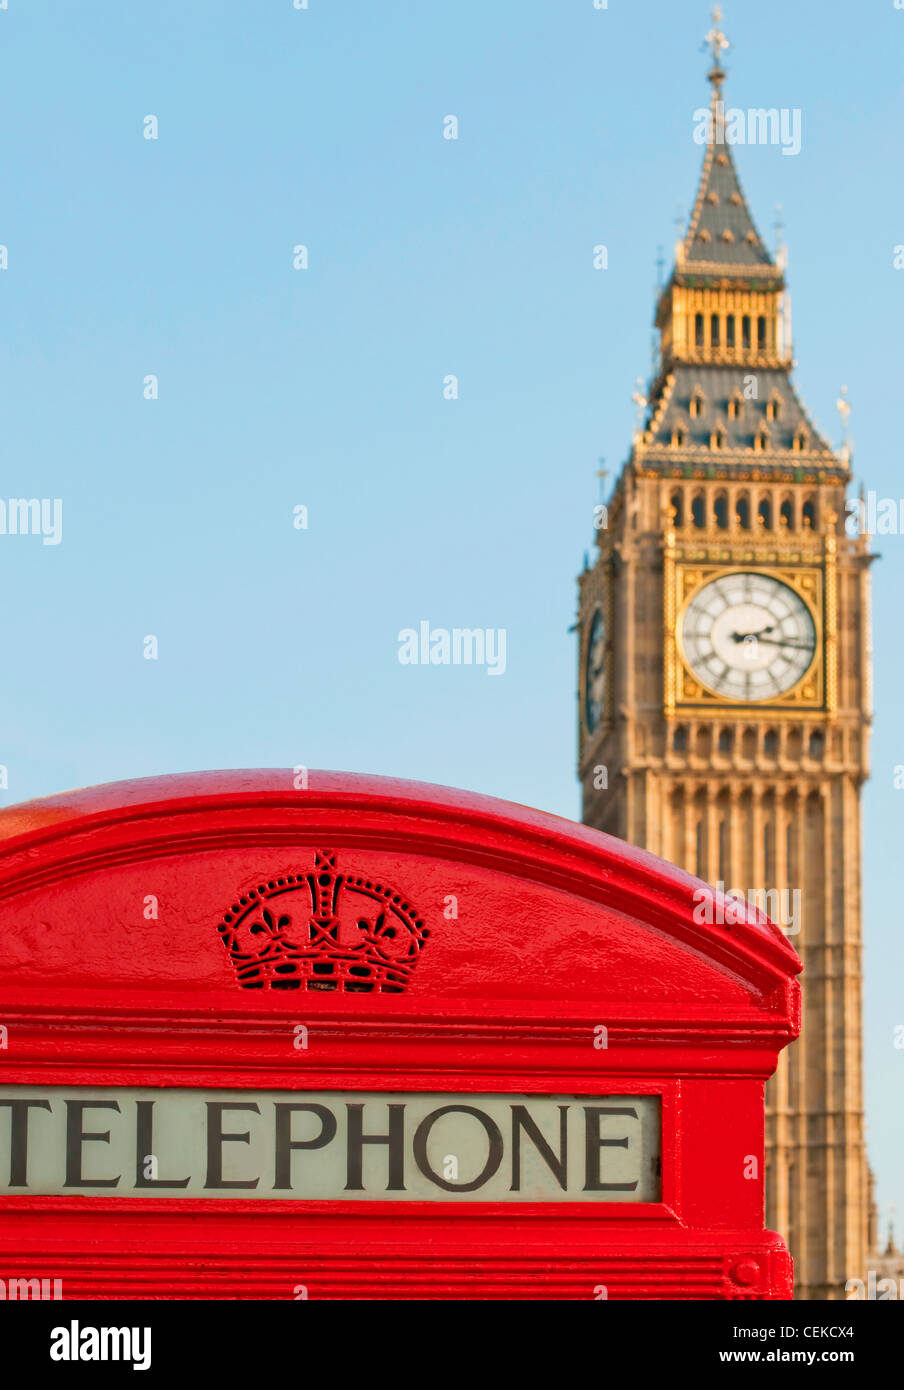 Red telephone box in London Stock Photo